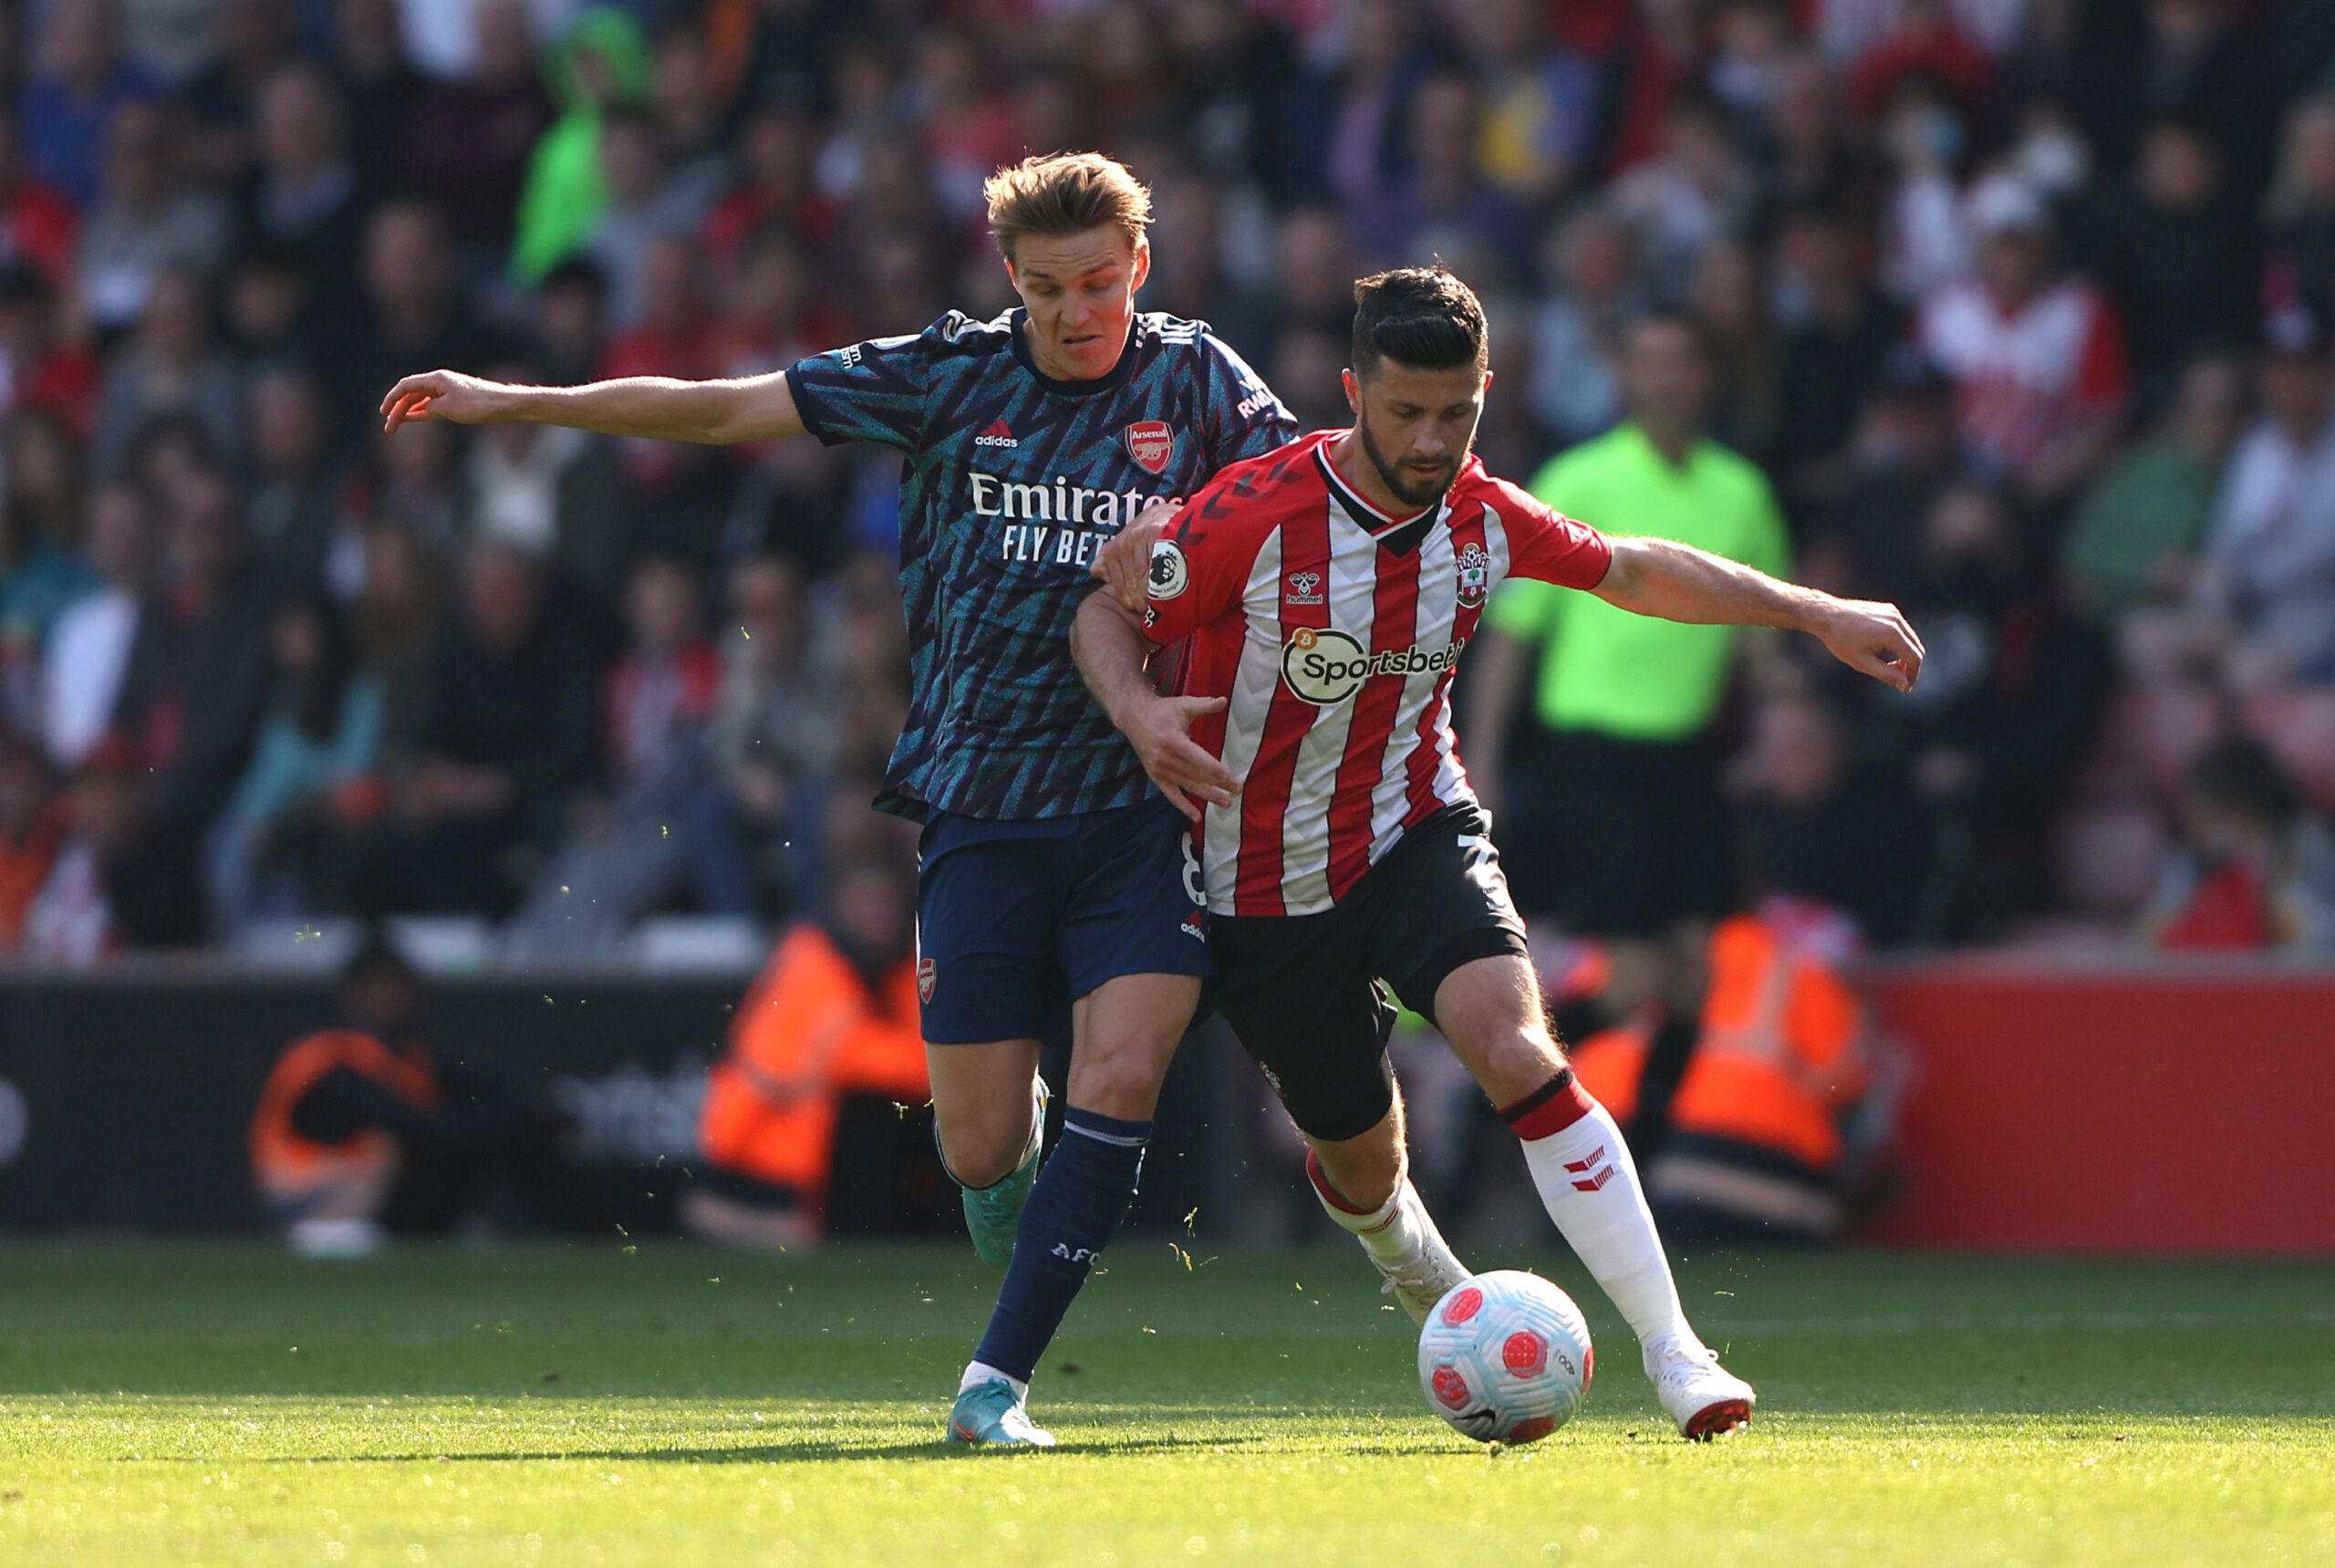 Soccer Football - Premier League - Southampton v Arsenal - St Mary's Stadium, Southampton, Britain - April 16, 2022 Arsenal's Martin Odegaard in action with Southampton's Shane Long REUTERS/Ian Walton EDITORIAL USE ONLY. No use with unauthorized audio, video, data, fixture lists, club/league logos or 'live' services. Online in-match use limited to 75 images, no video emulation. No use in betting, games or single club /league/player publications.  Please contact your account representative for fu